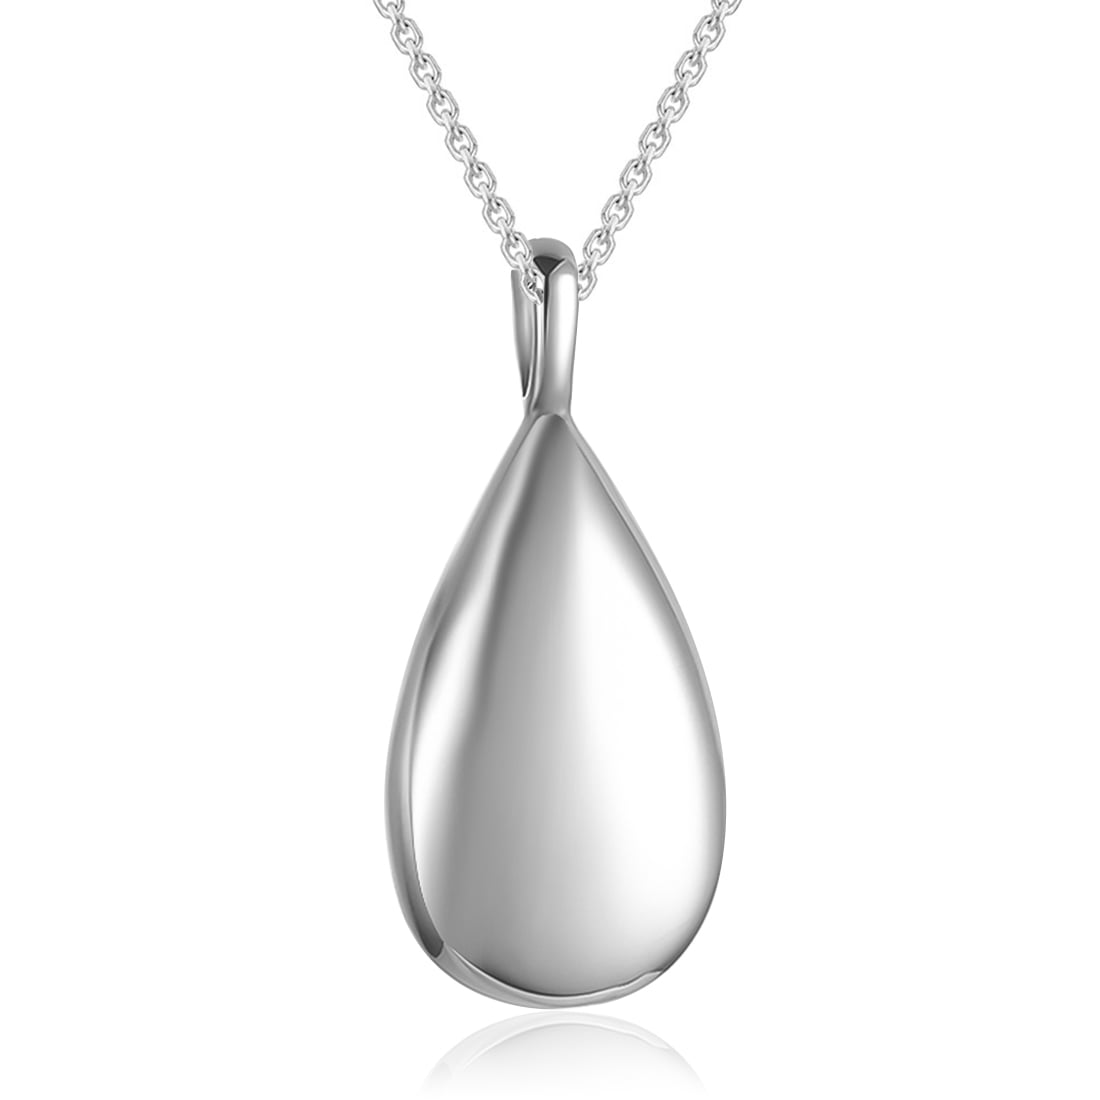 Fillable Jewelry Cremation Jewelry for women Jewellery Cremation & Memorial Jewellery Pet Memorial Jewelry Gift Human Ash Urn White Howlite Teardrop Urn Locket Necklace 